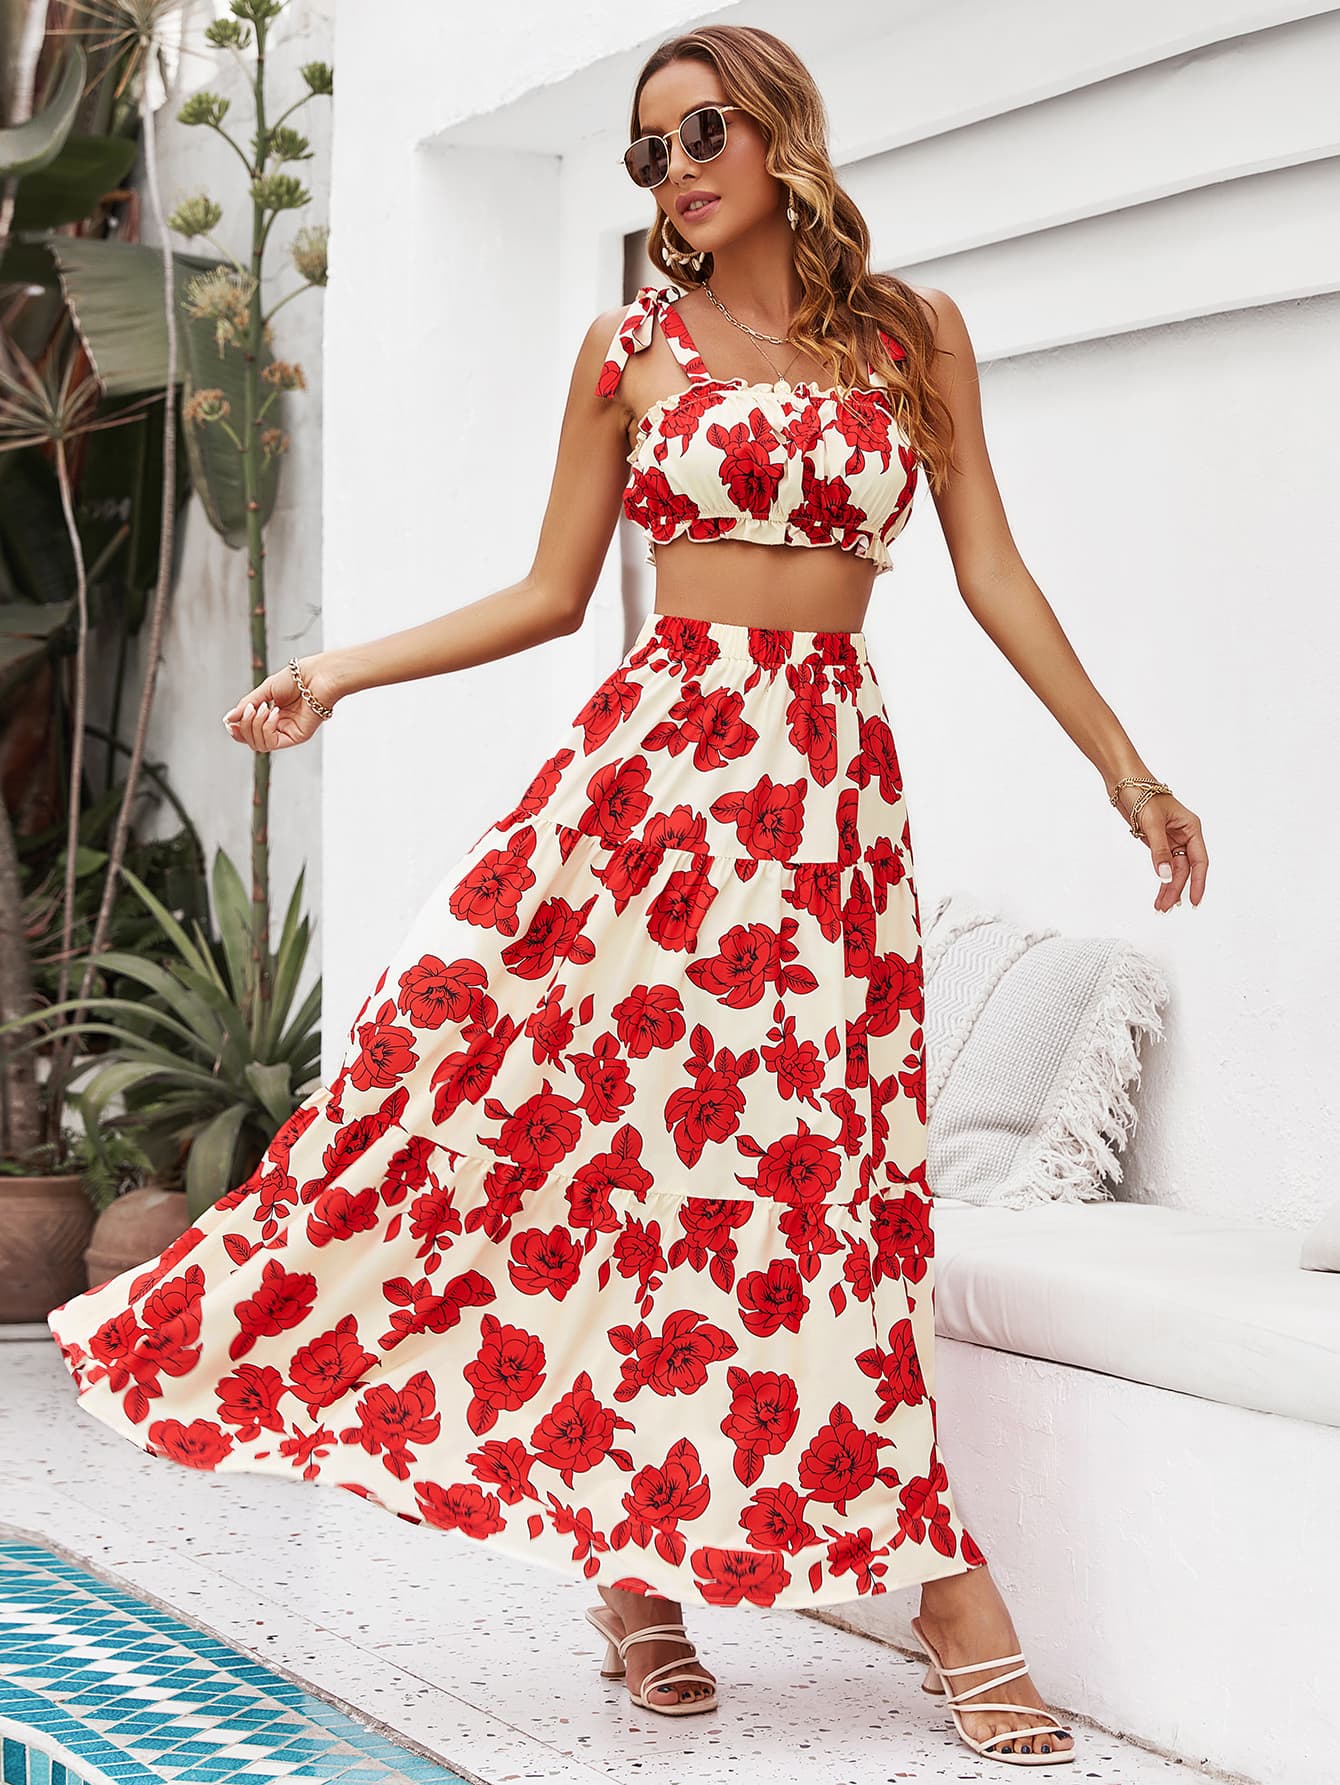 Floral Tie Shoulder Top and Tiered Maxi Skirt Set - Guy Christopher